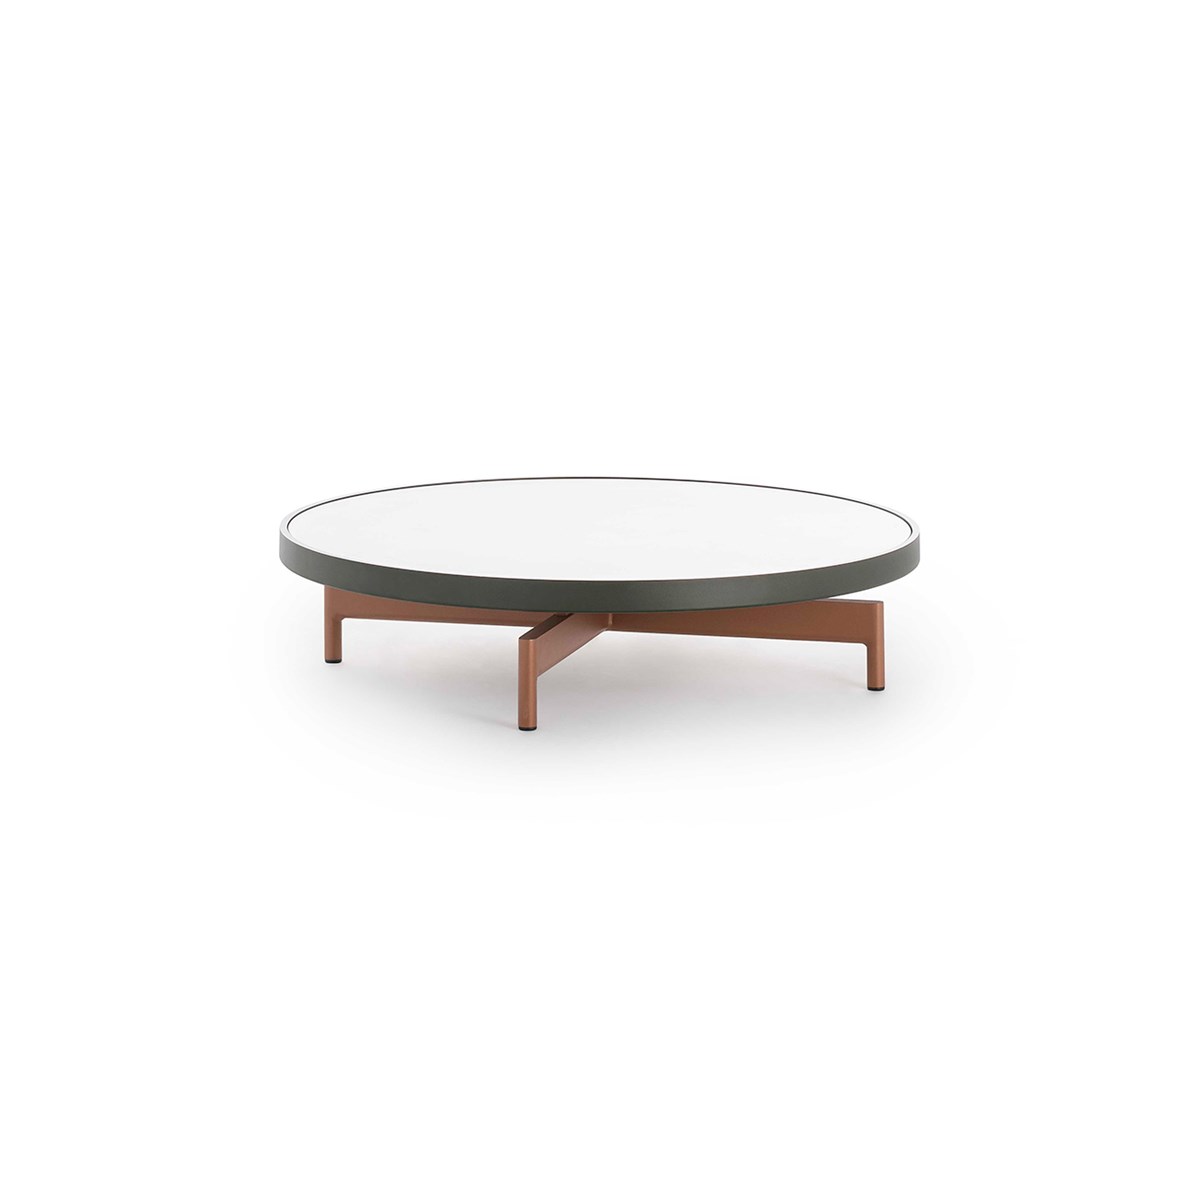 Onde Round Coffee Table D90x22 Bottle Green Copper 45